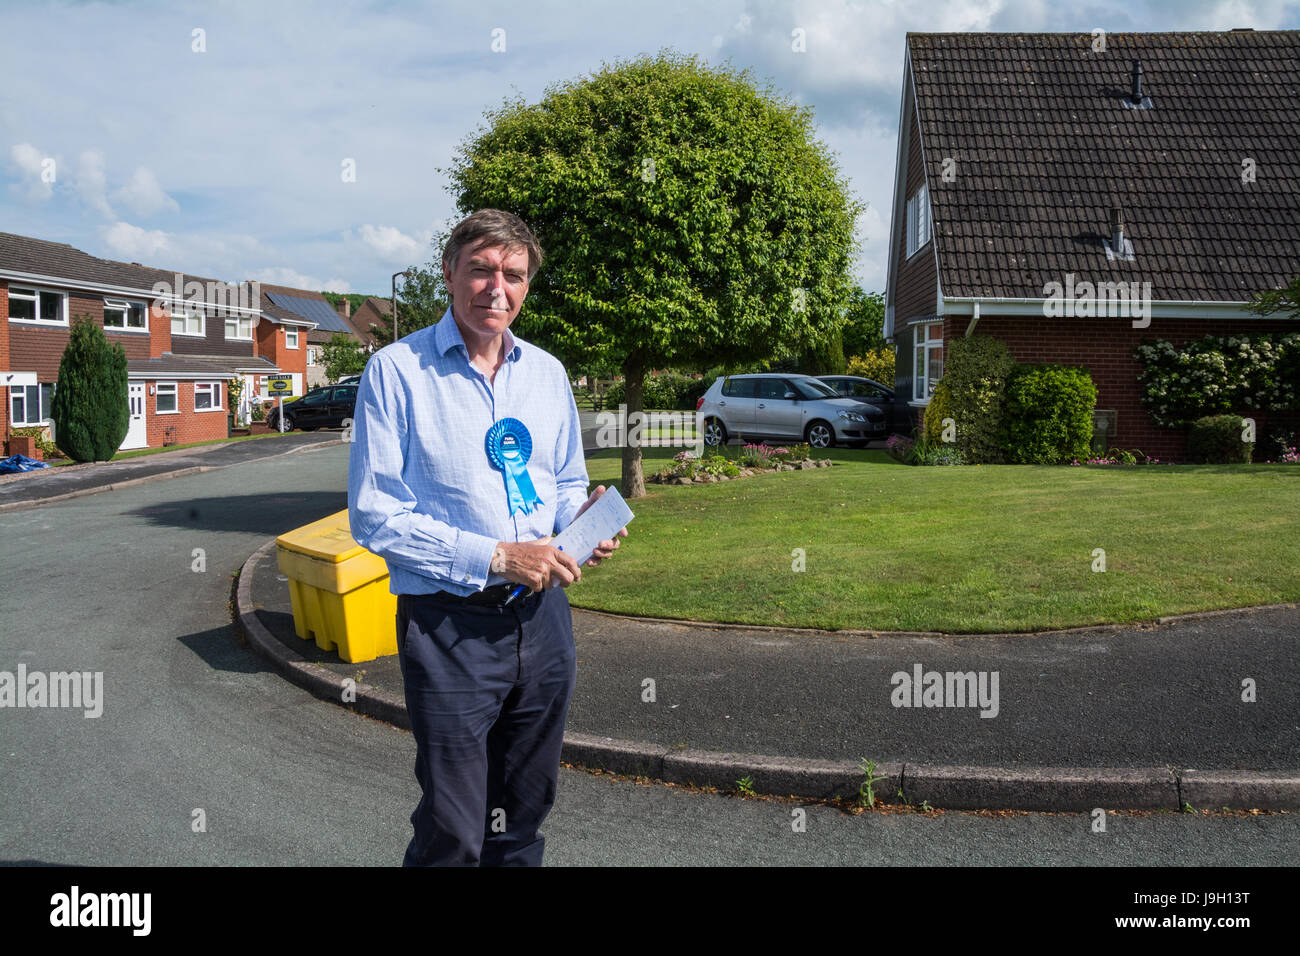 Philip Dunne Mp High Resolution Stock Photography and Images - Alamy